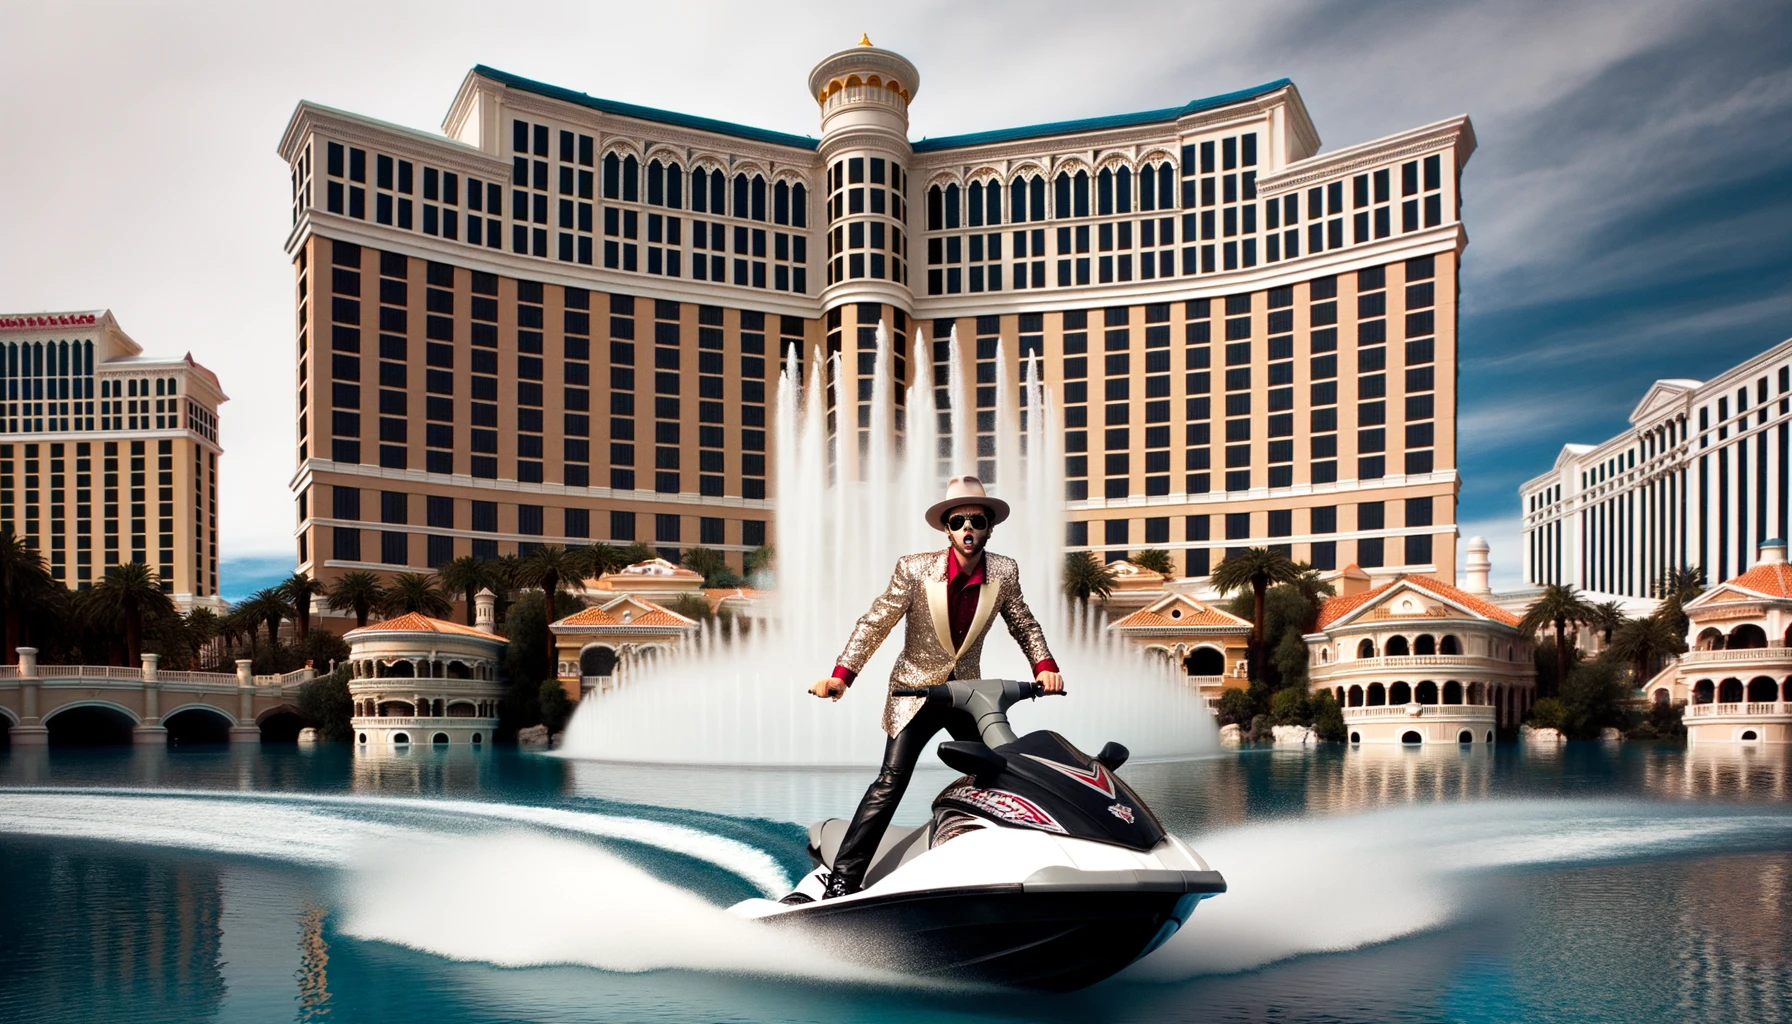 A luxurious Las Vegas-style hotel with a dazzling fountain show. A stylish man with a fedora and flashy jacket rides a jet ski amidst the fountain sprays